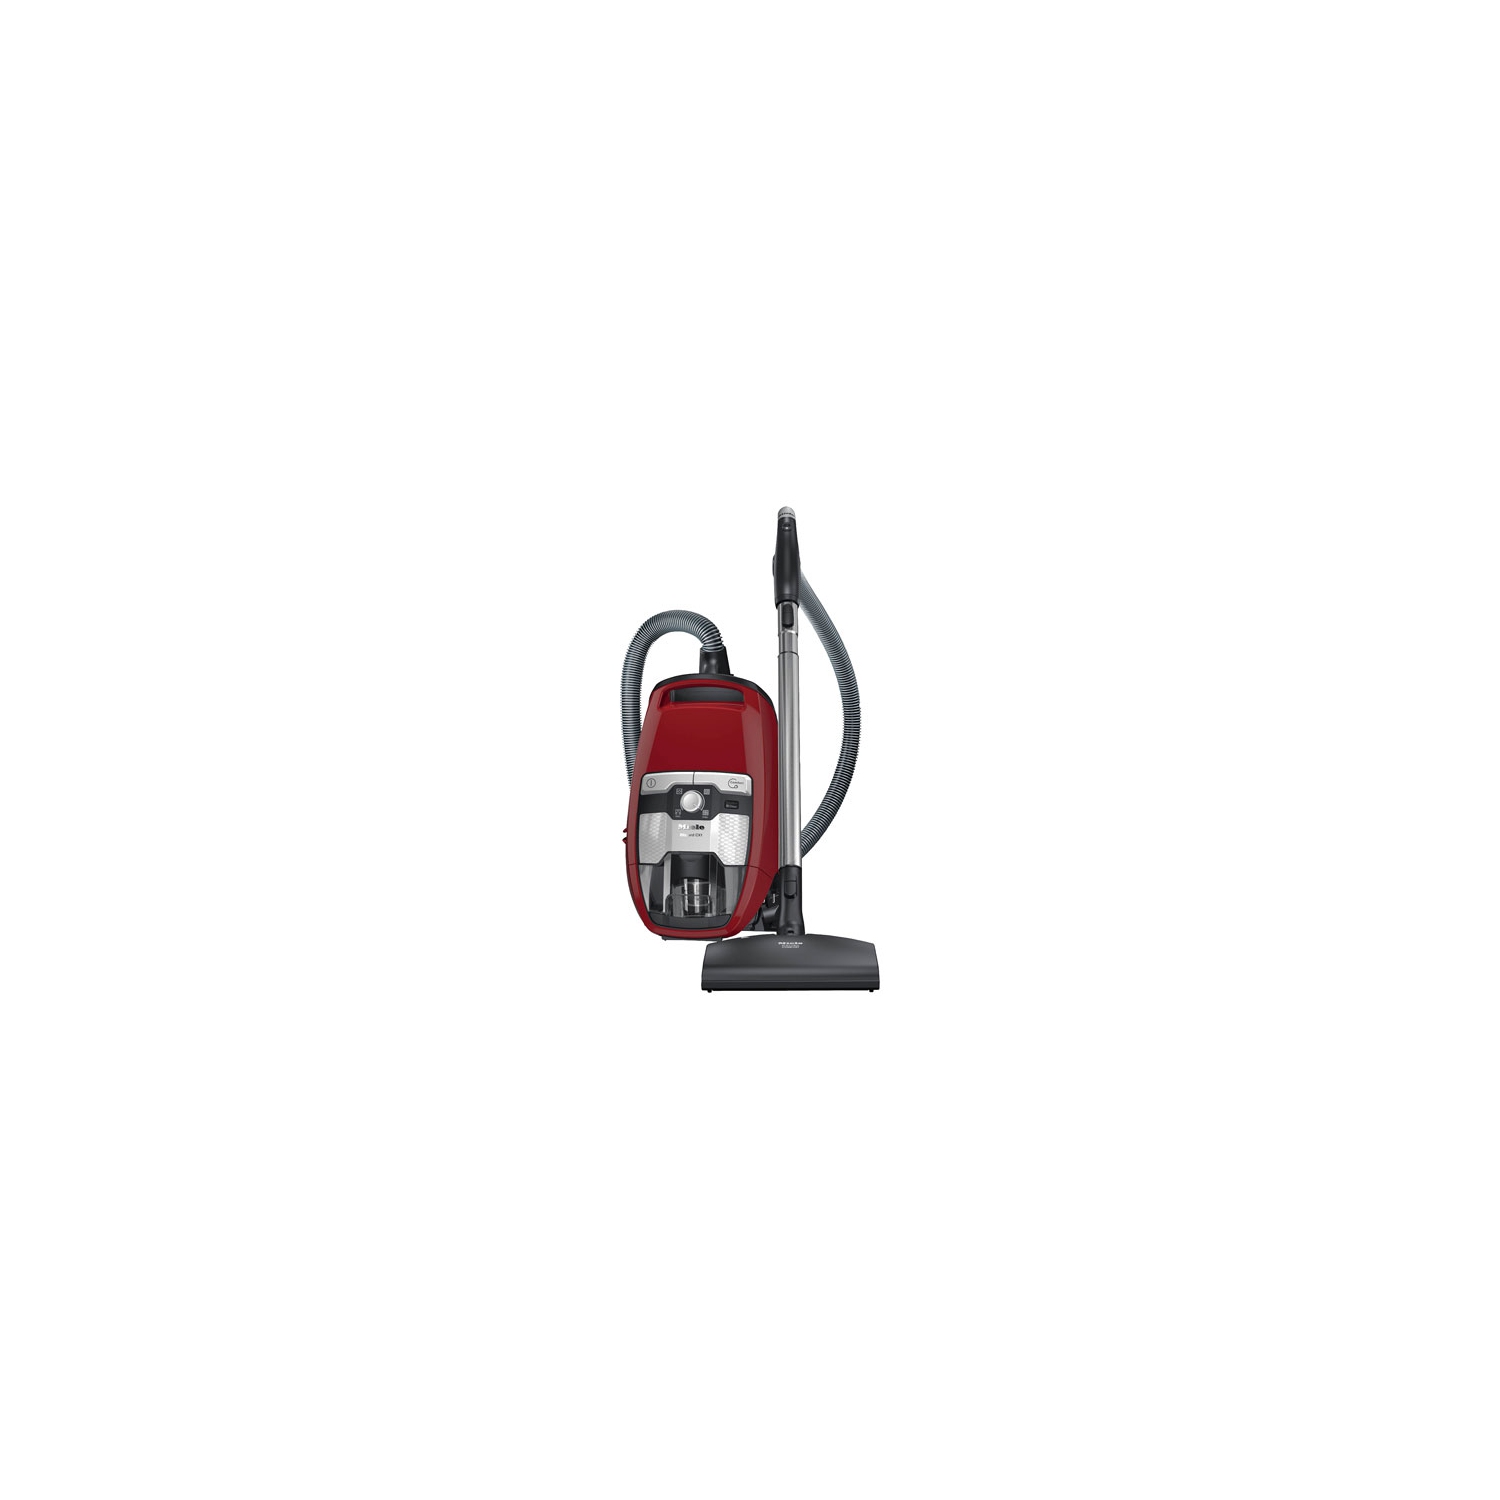 Miele Blizzard Cat & Dog Canister Vacuum (CX1)-Autumn Red